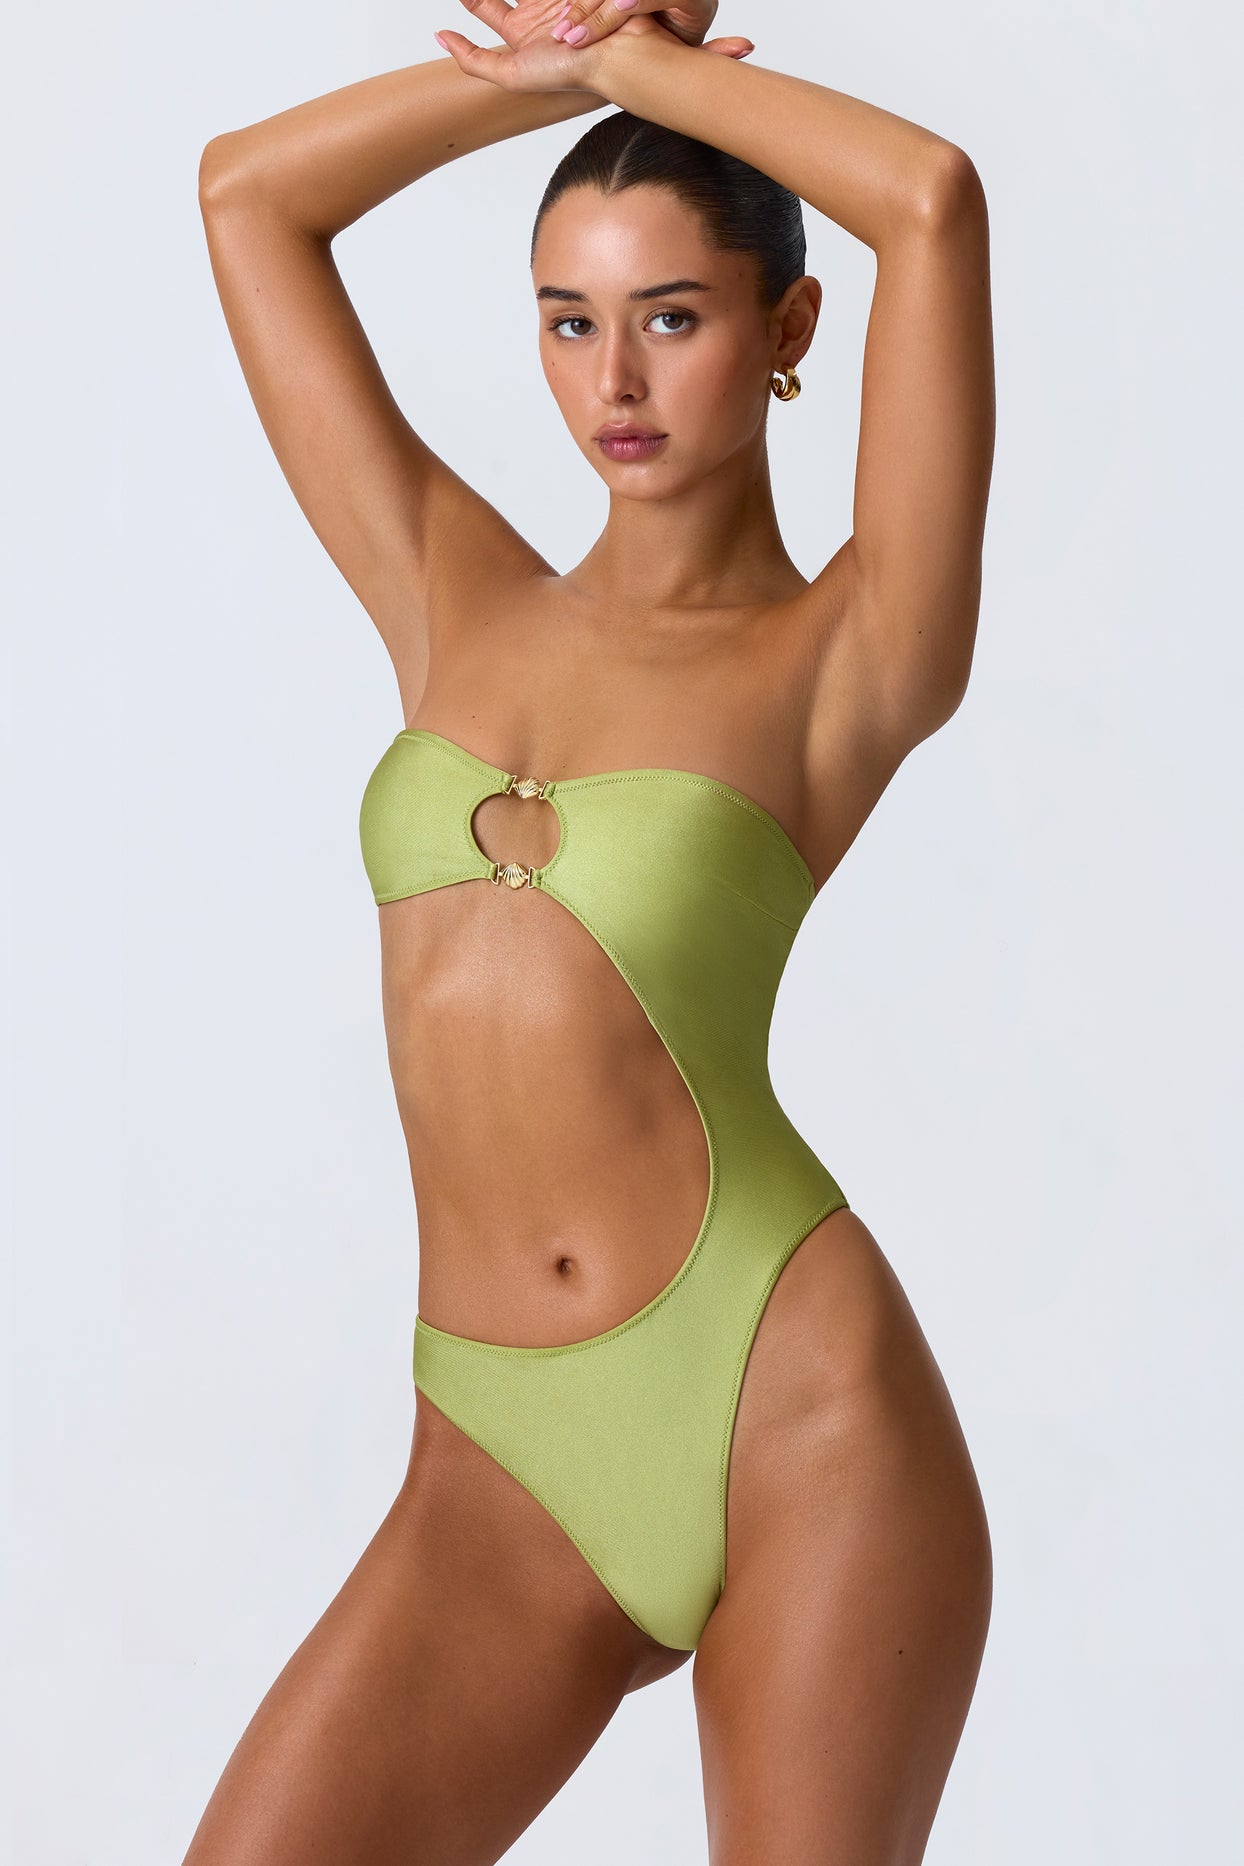 Embellished Cut-Out Bandeau Swimsuit in Pear Green